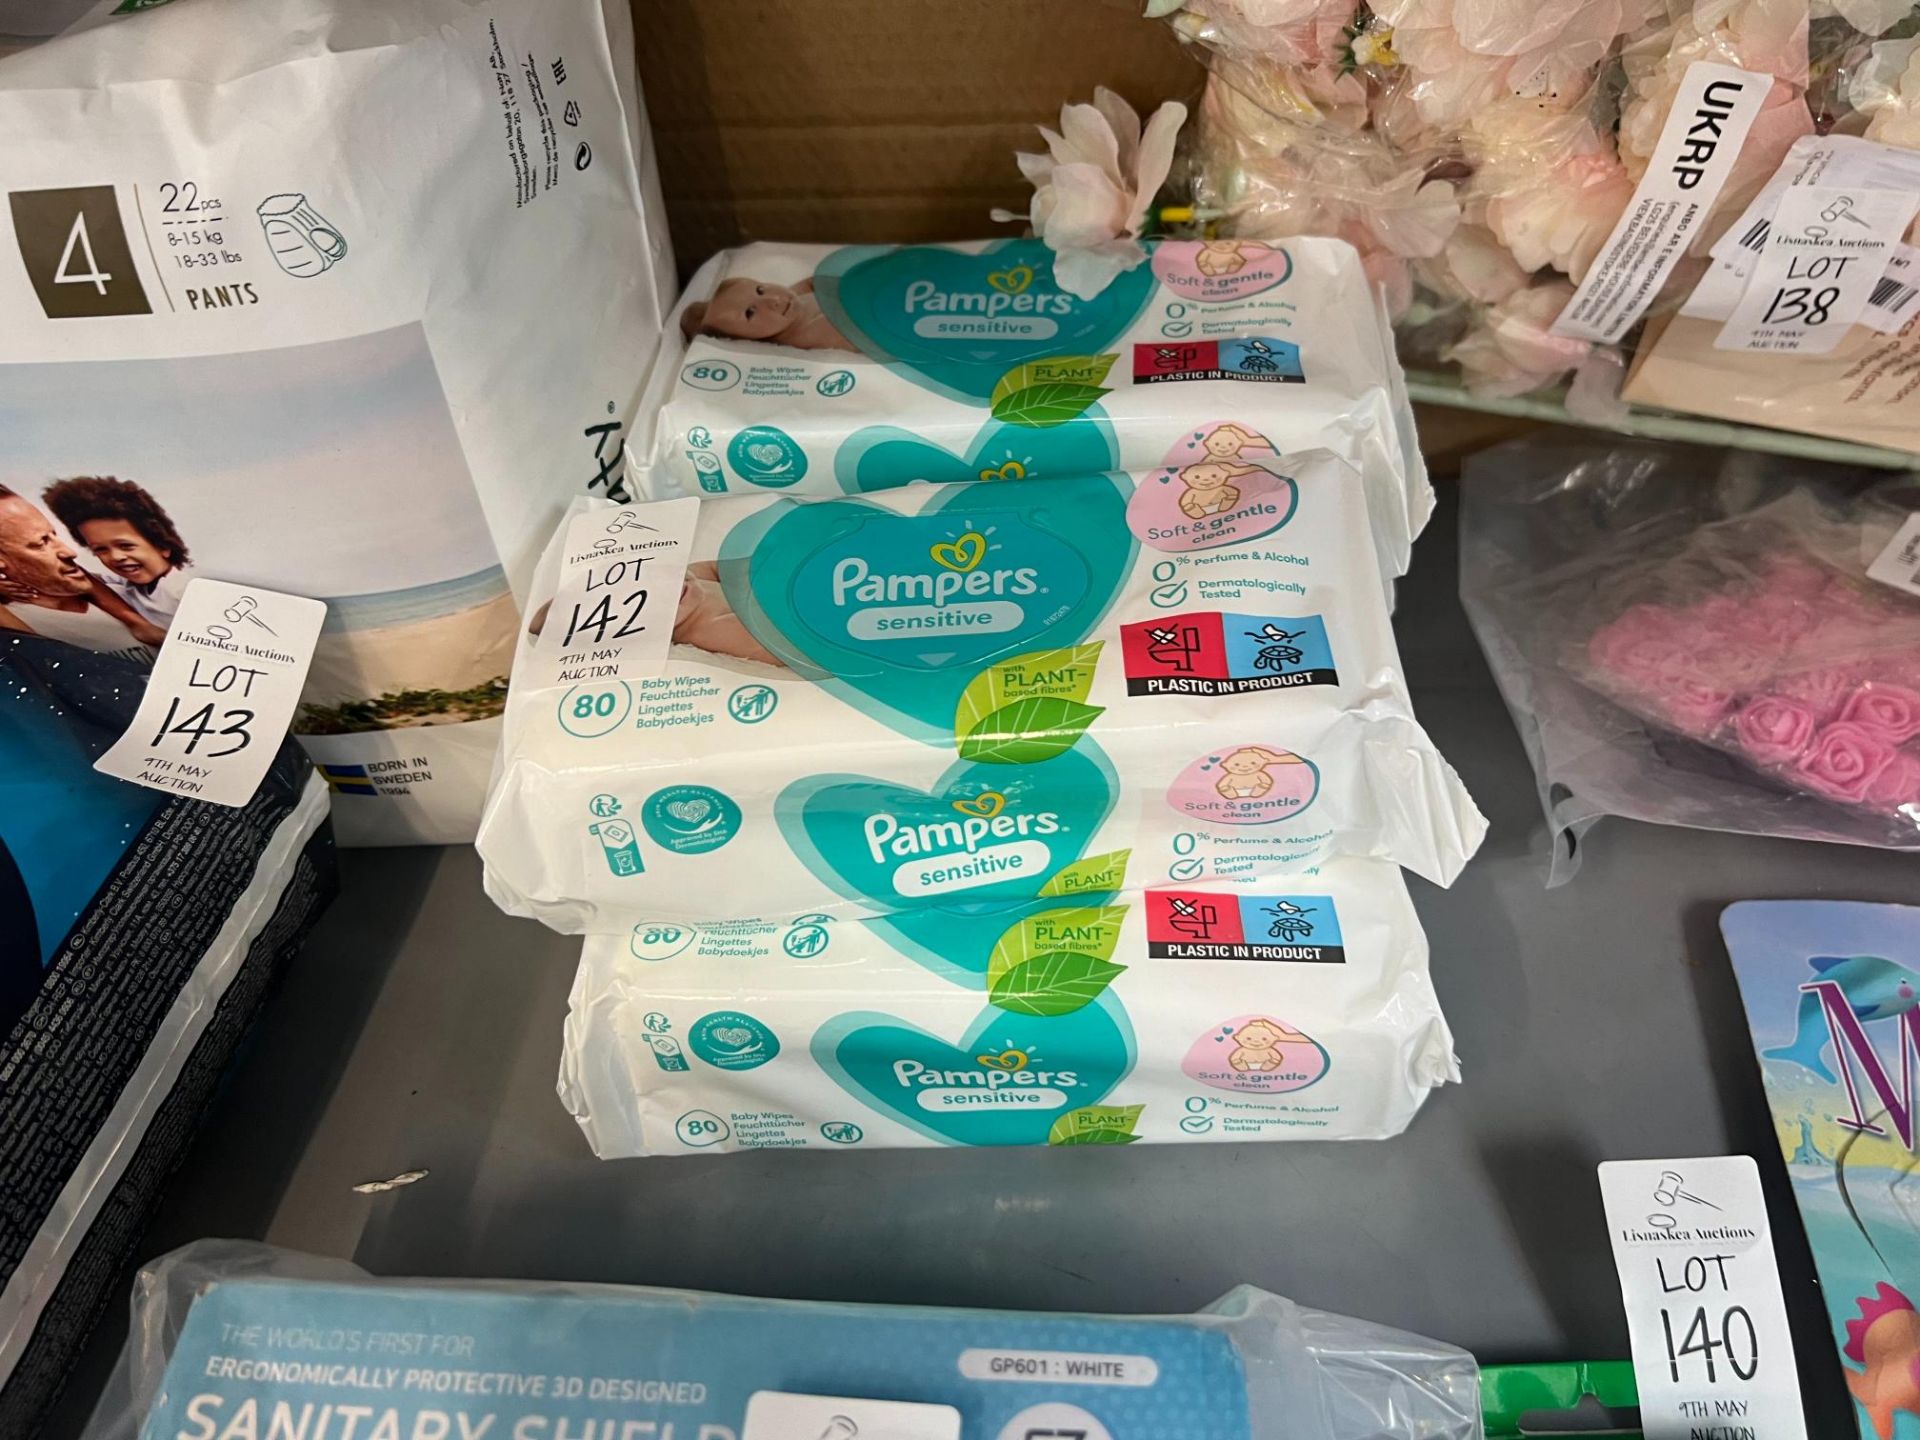 5X PACKS OF PAMPERS SENSITIVE BABY WIPES